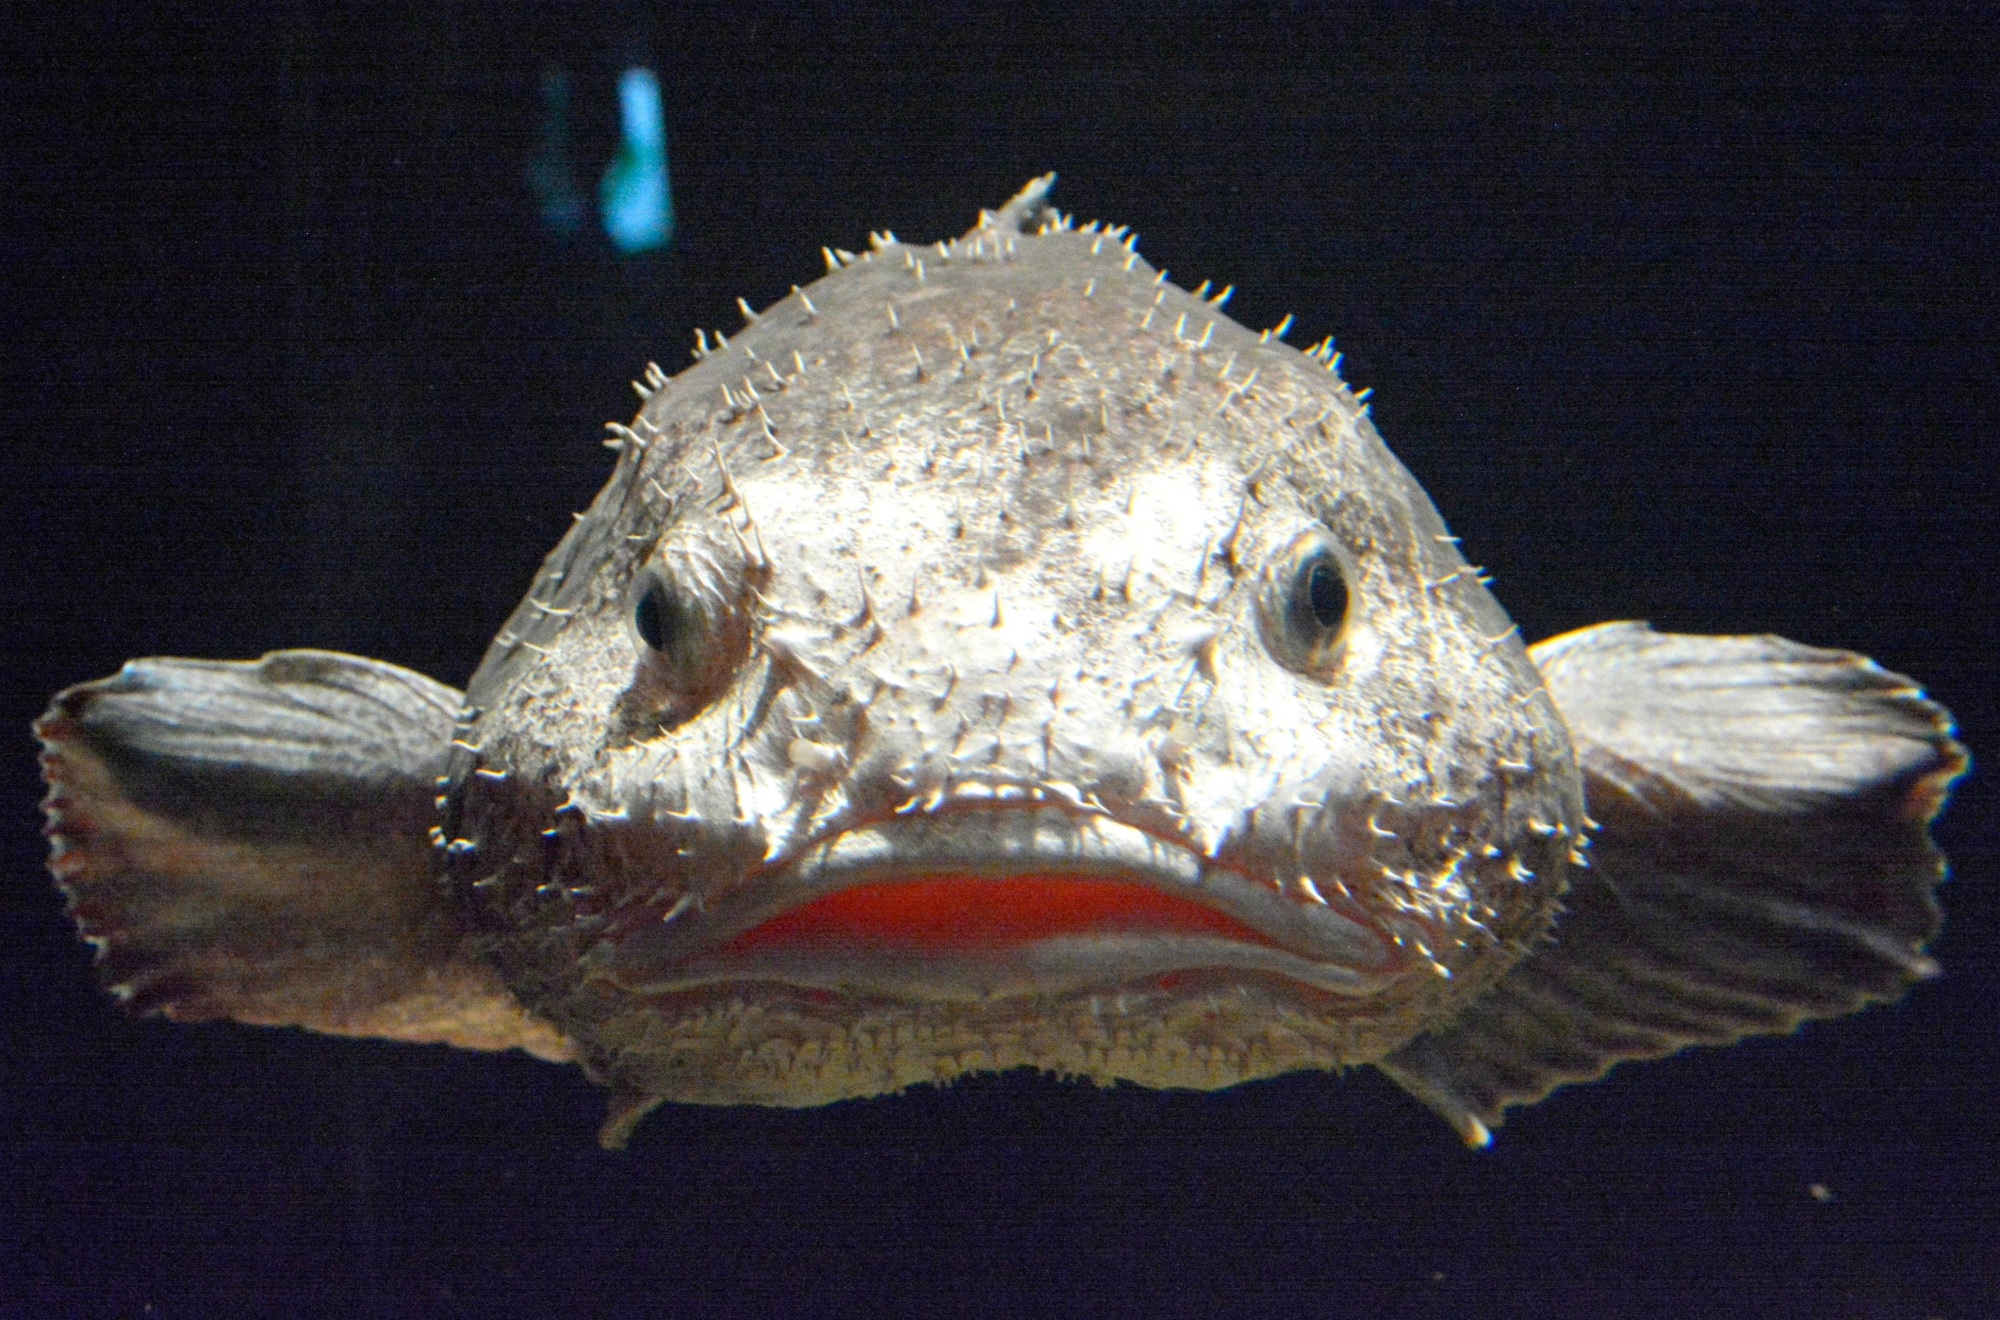 Ugliest Fish in The World